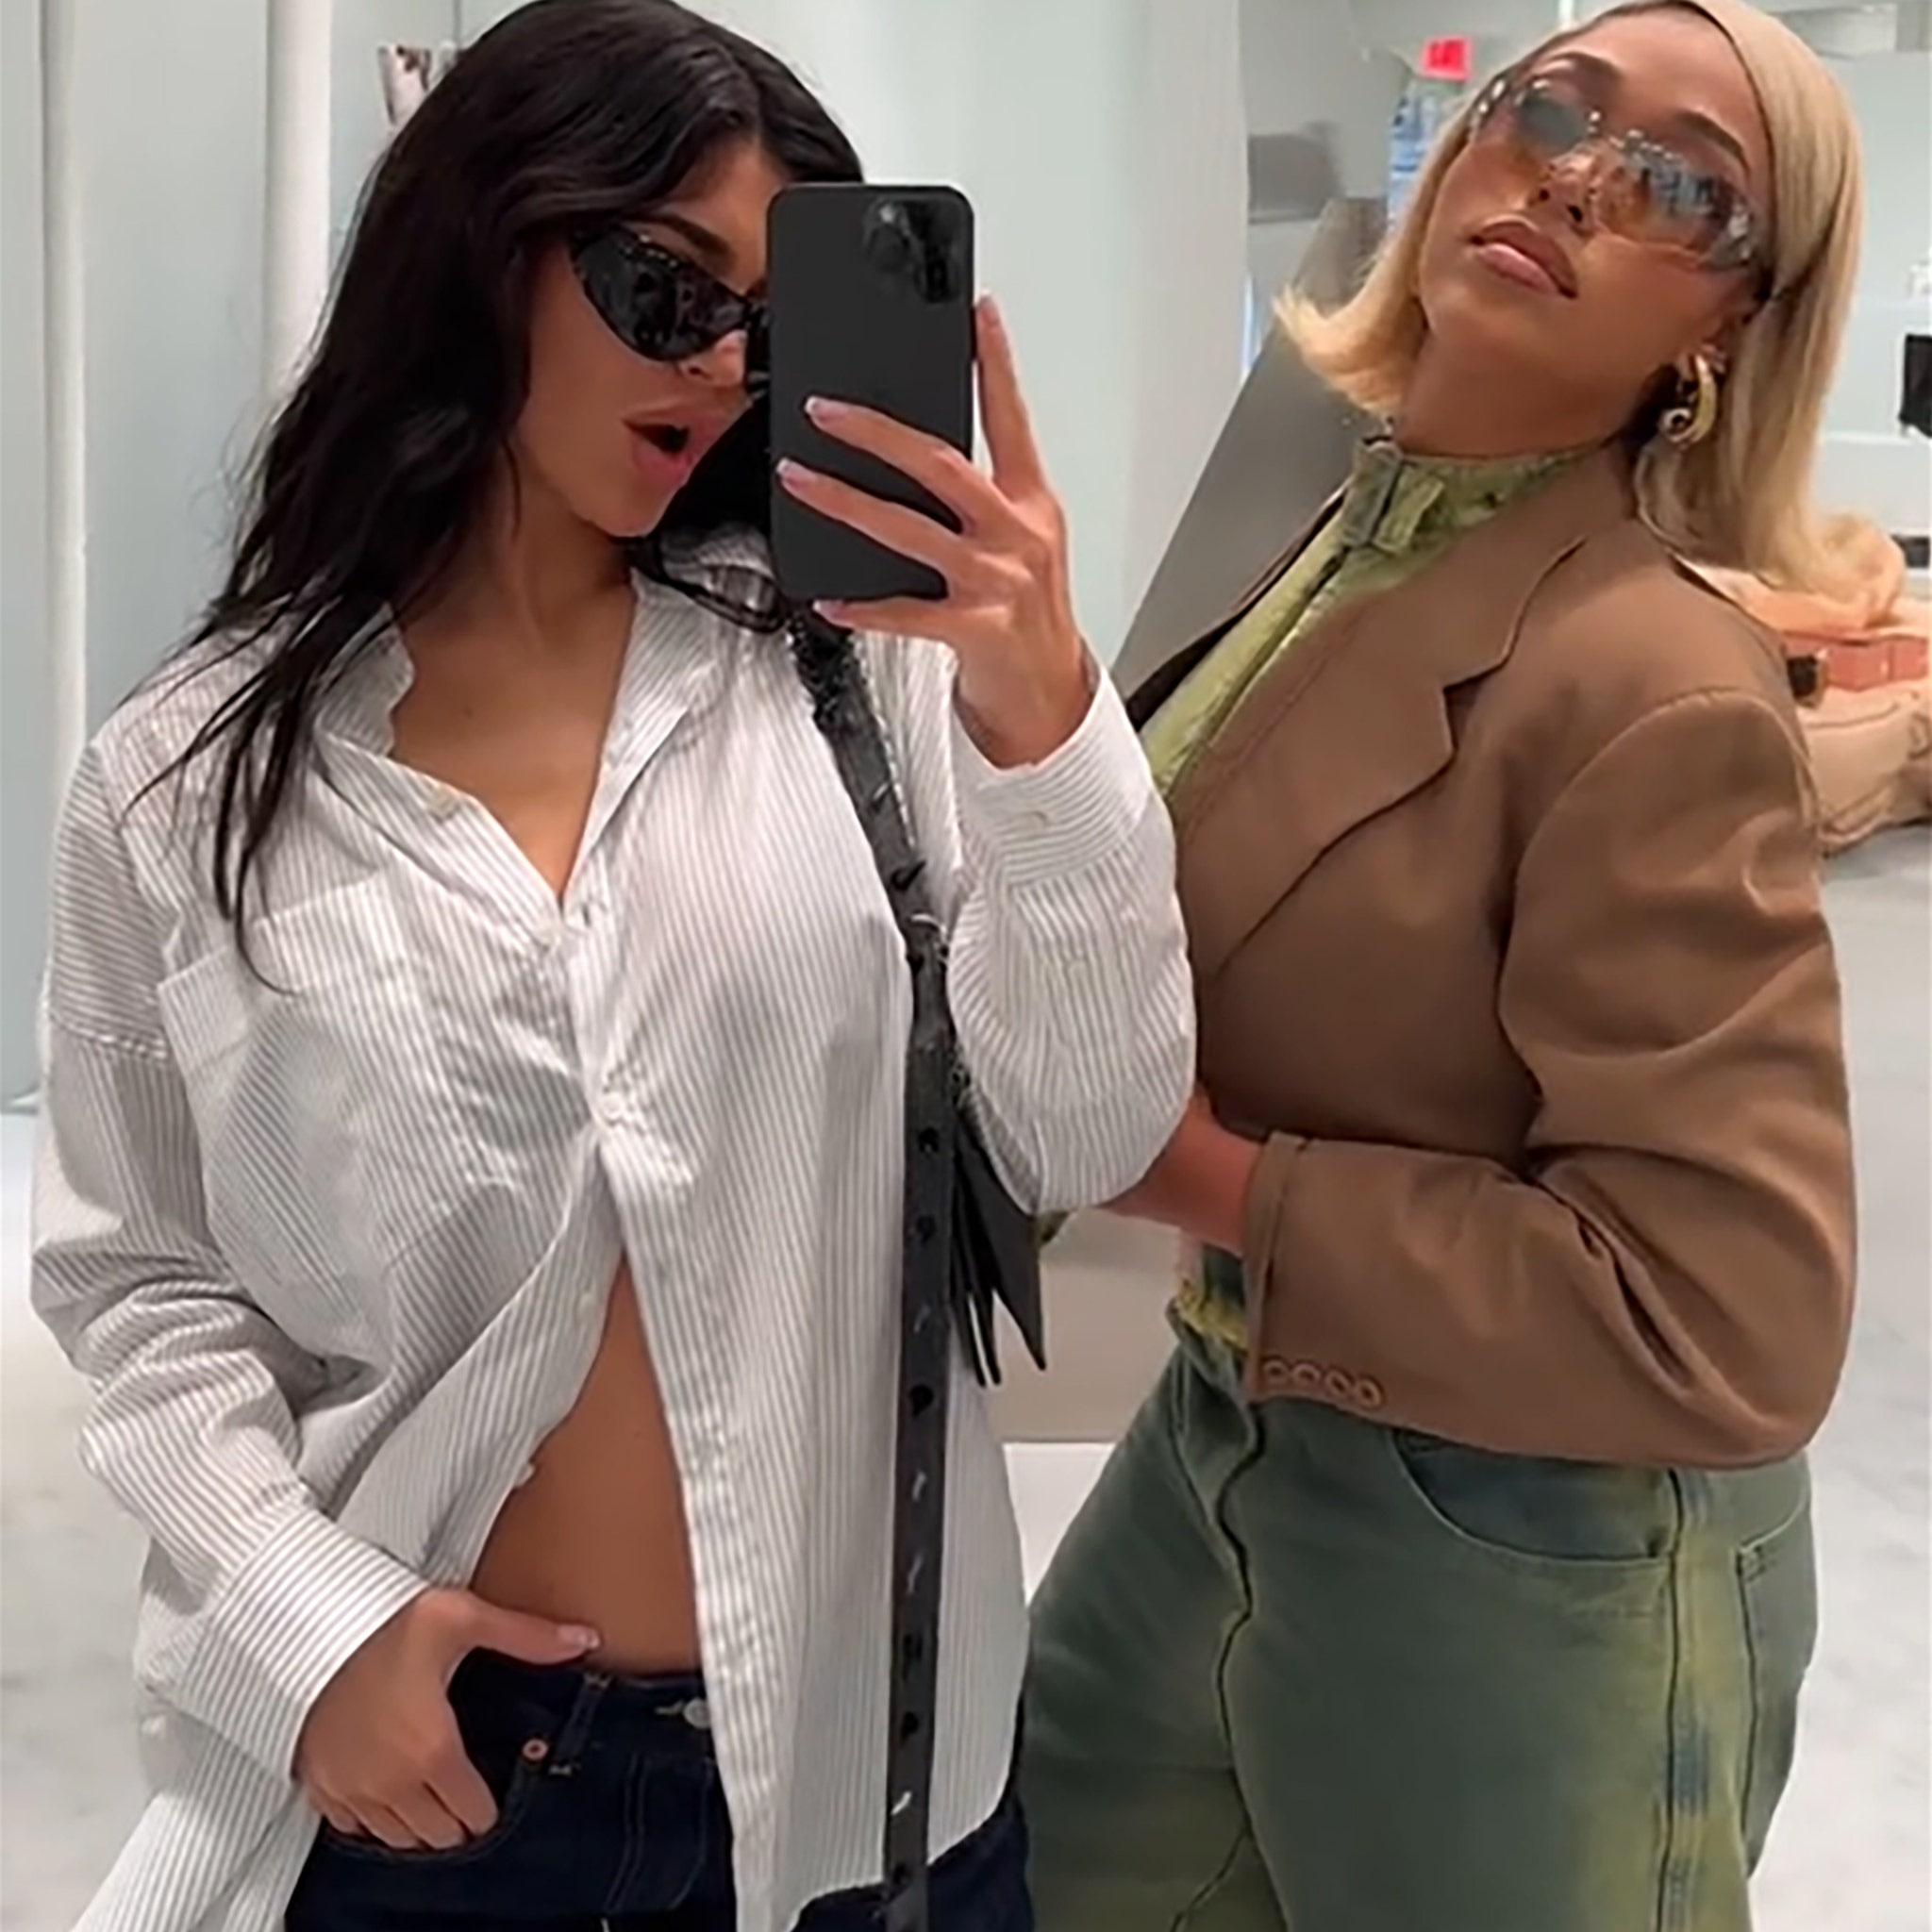 This TikTok theory says Kylie Jenner and Jordyn Woods are friends again